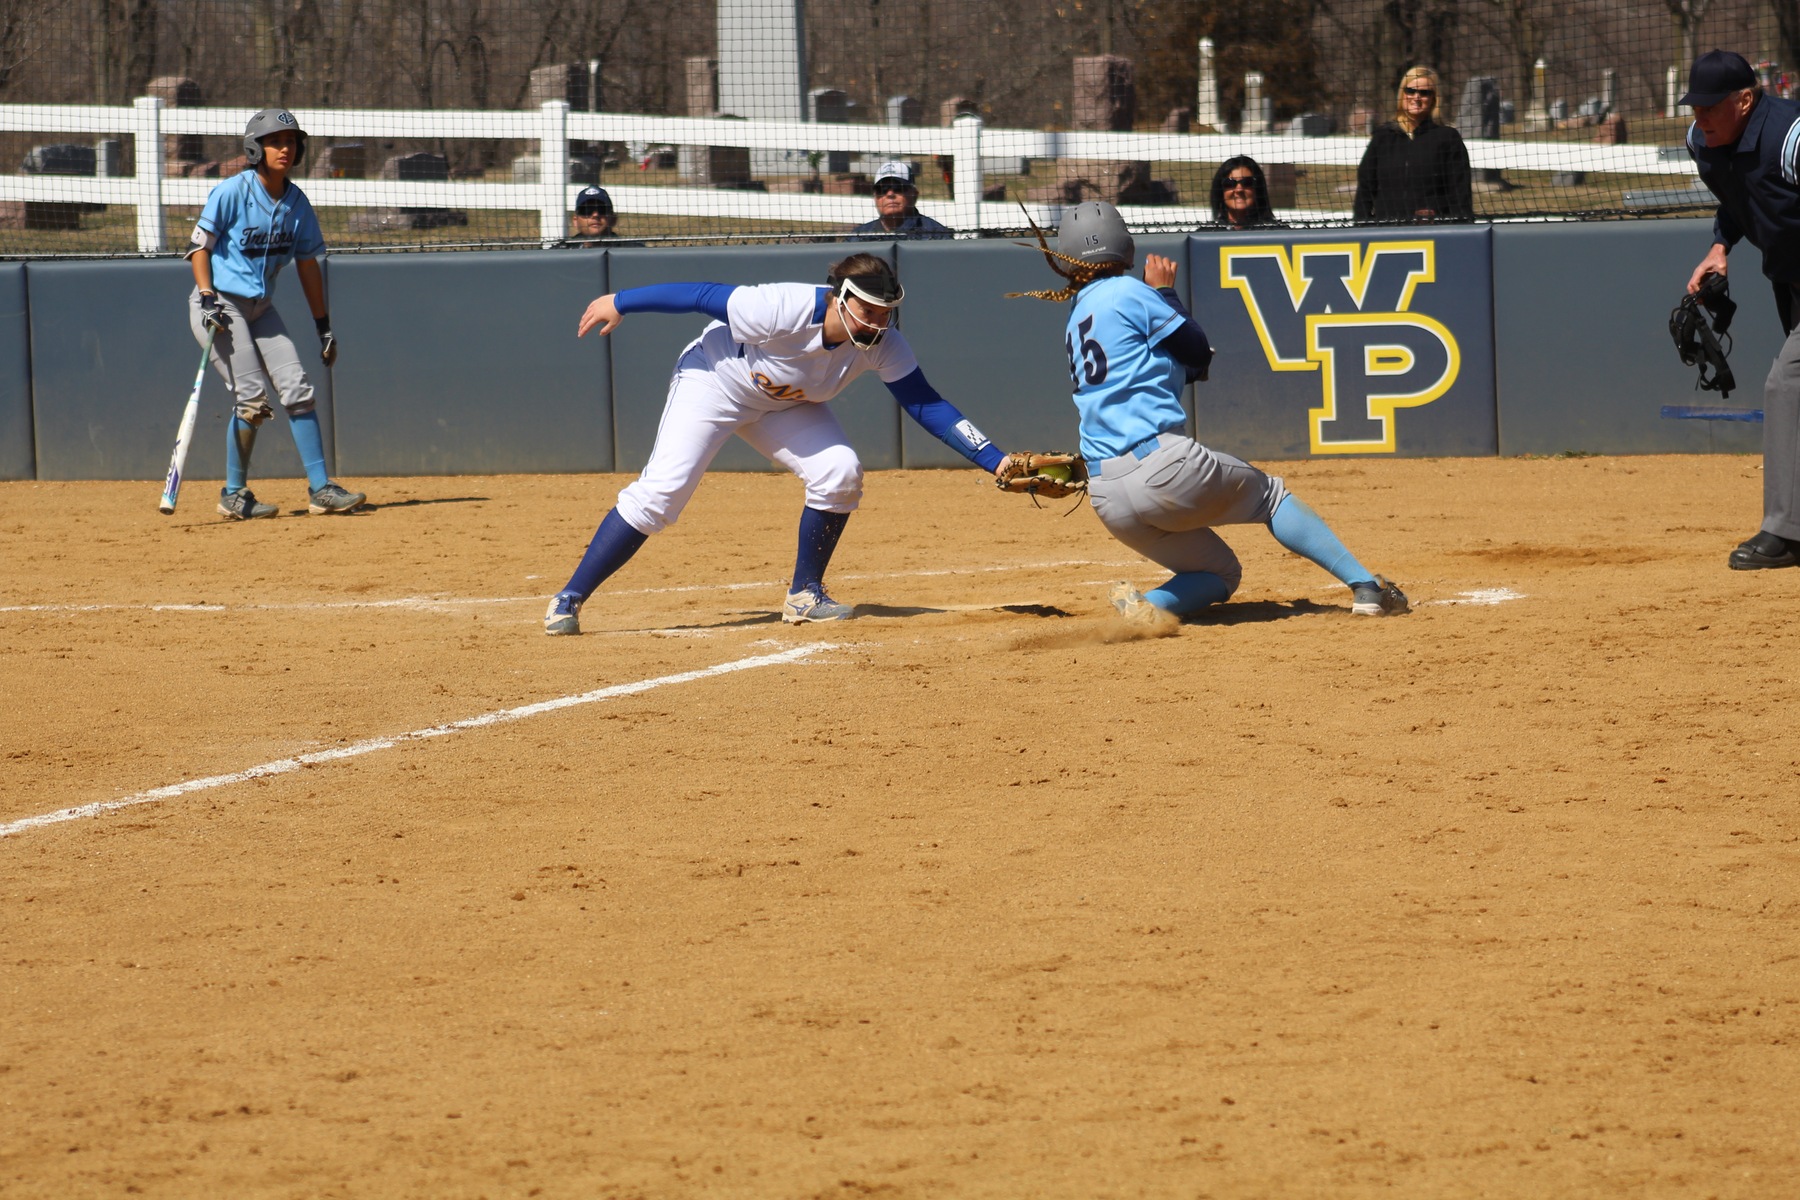 NIACC pitcher Courtney Johannes tags out Iowa Central's Alyssa Dema in the first game of Friday's doubleheader.